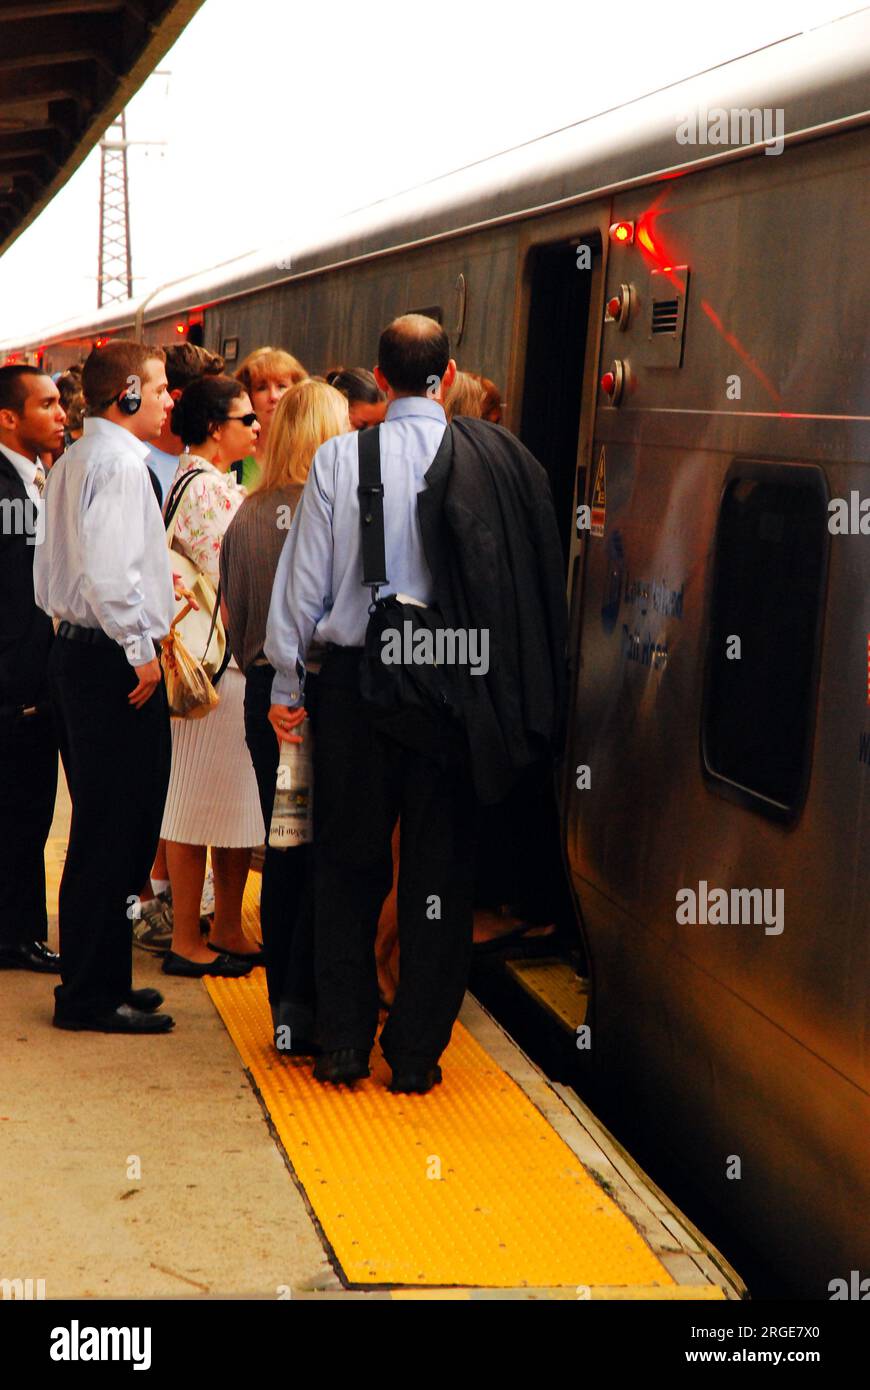 Commuters crowd the entrance to a Long Island Rail Road train car on their way to work in New York City Stock Photo